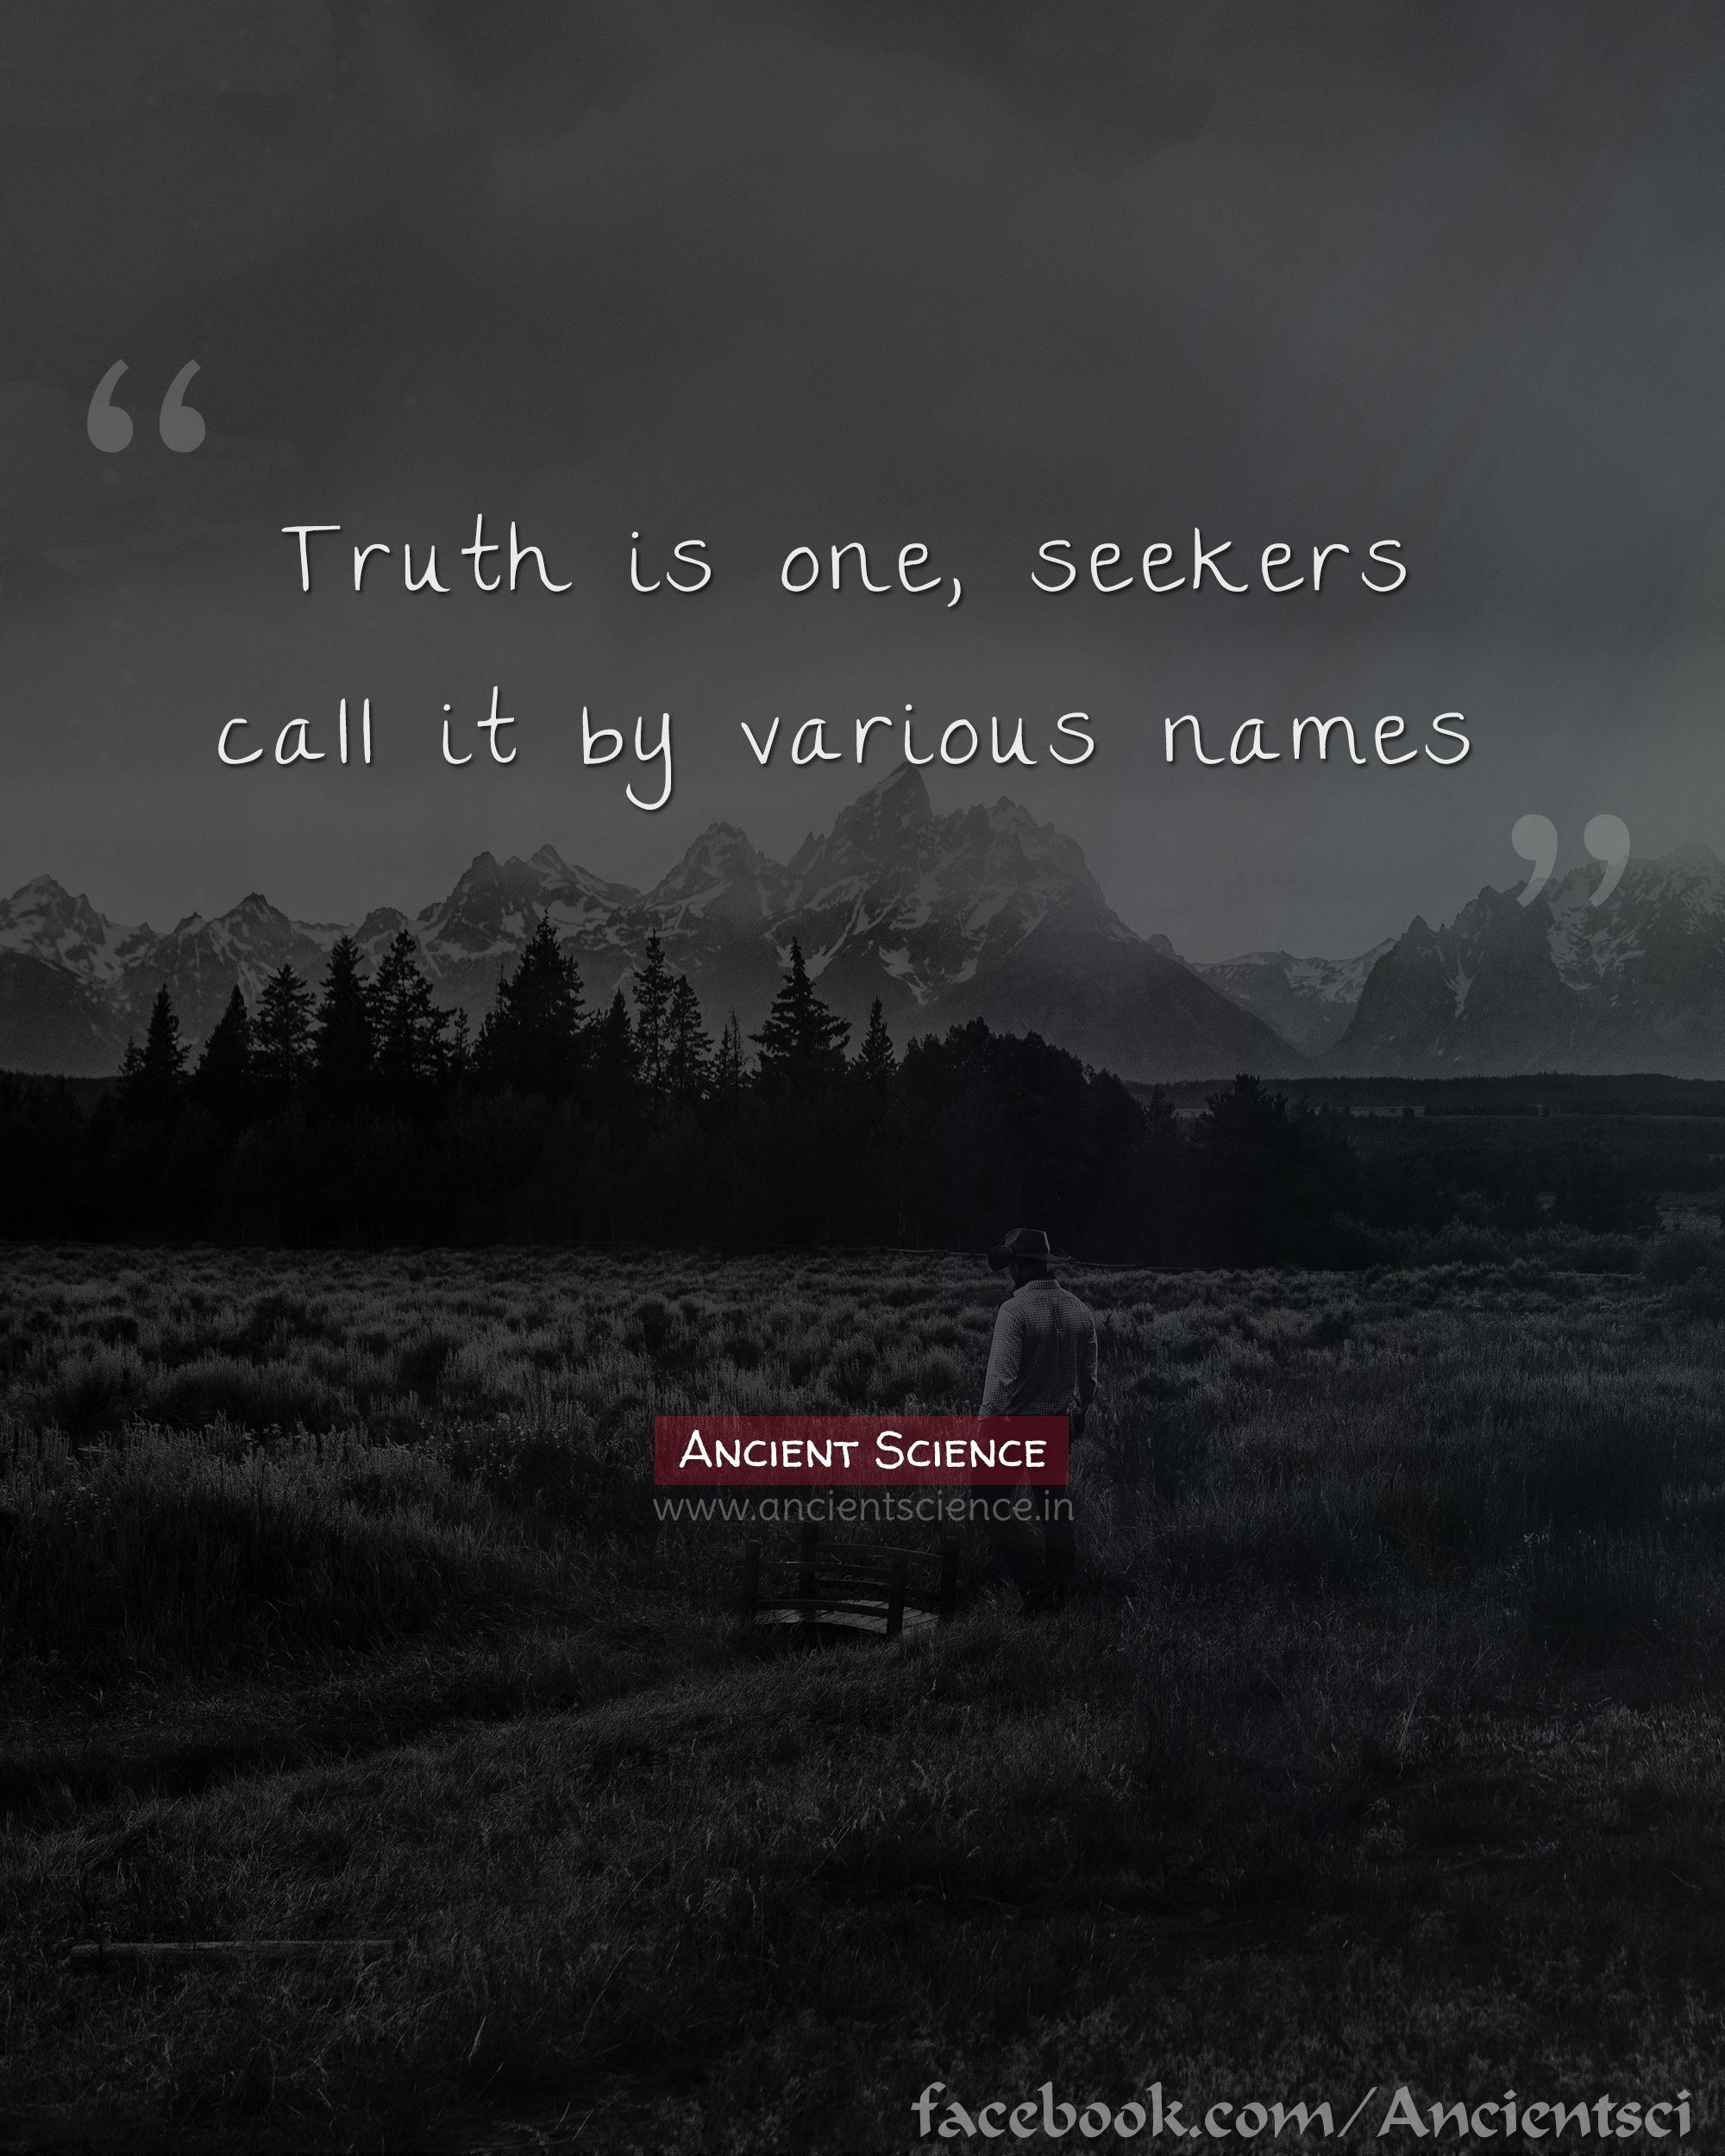 Truth is one, seekers call it by various names.